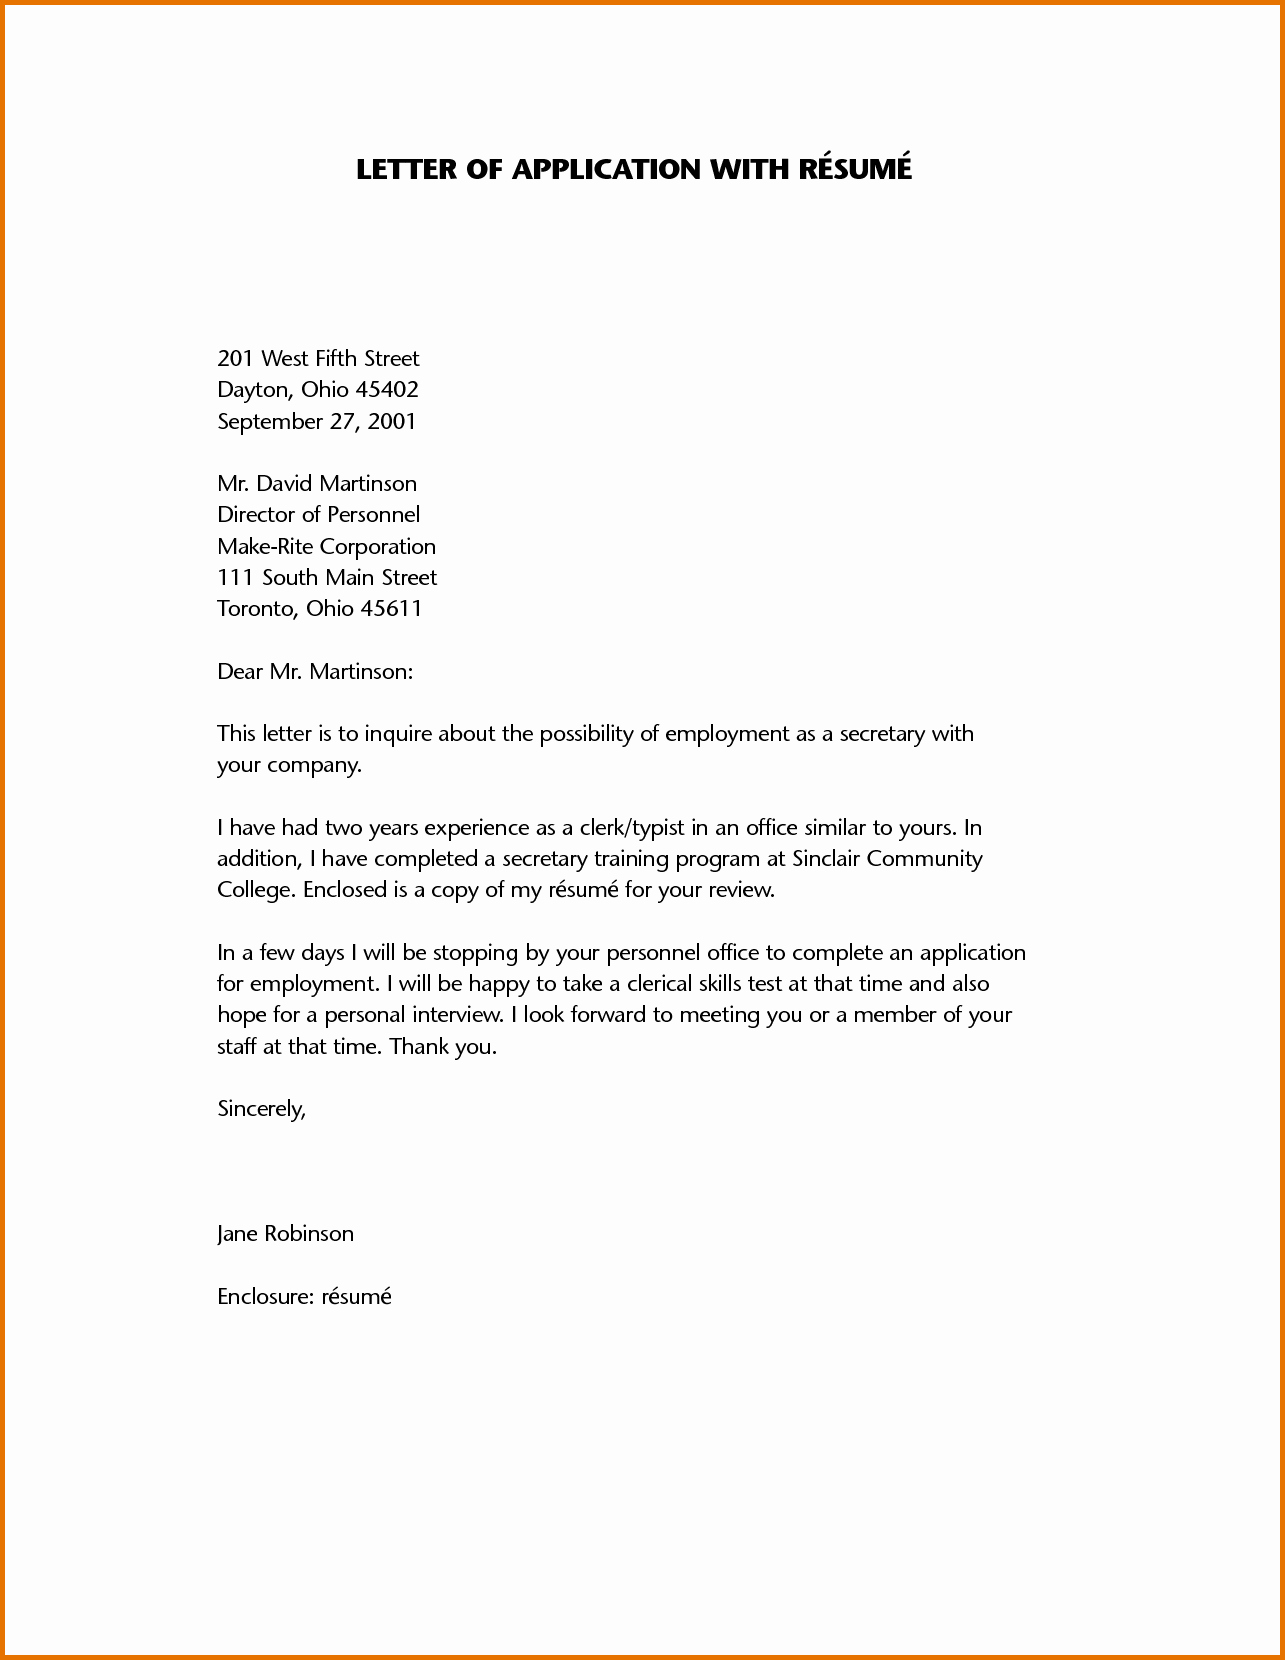 Sample Of Application Letter and Resumereference Letters